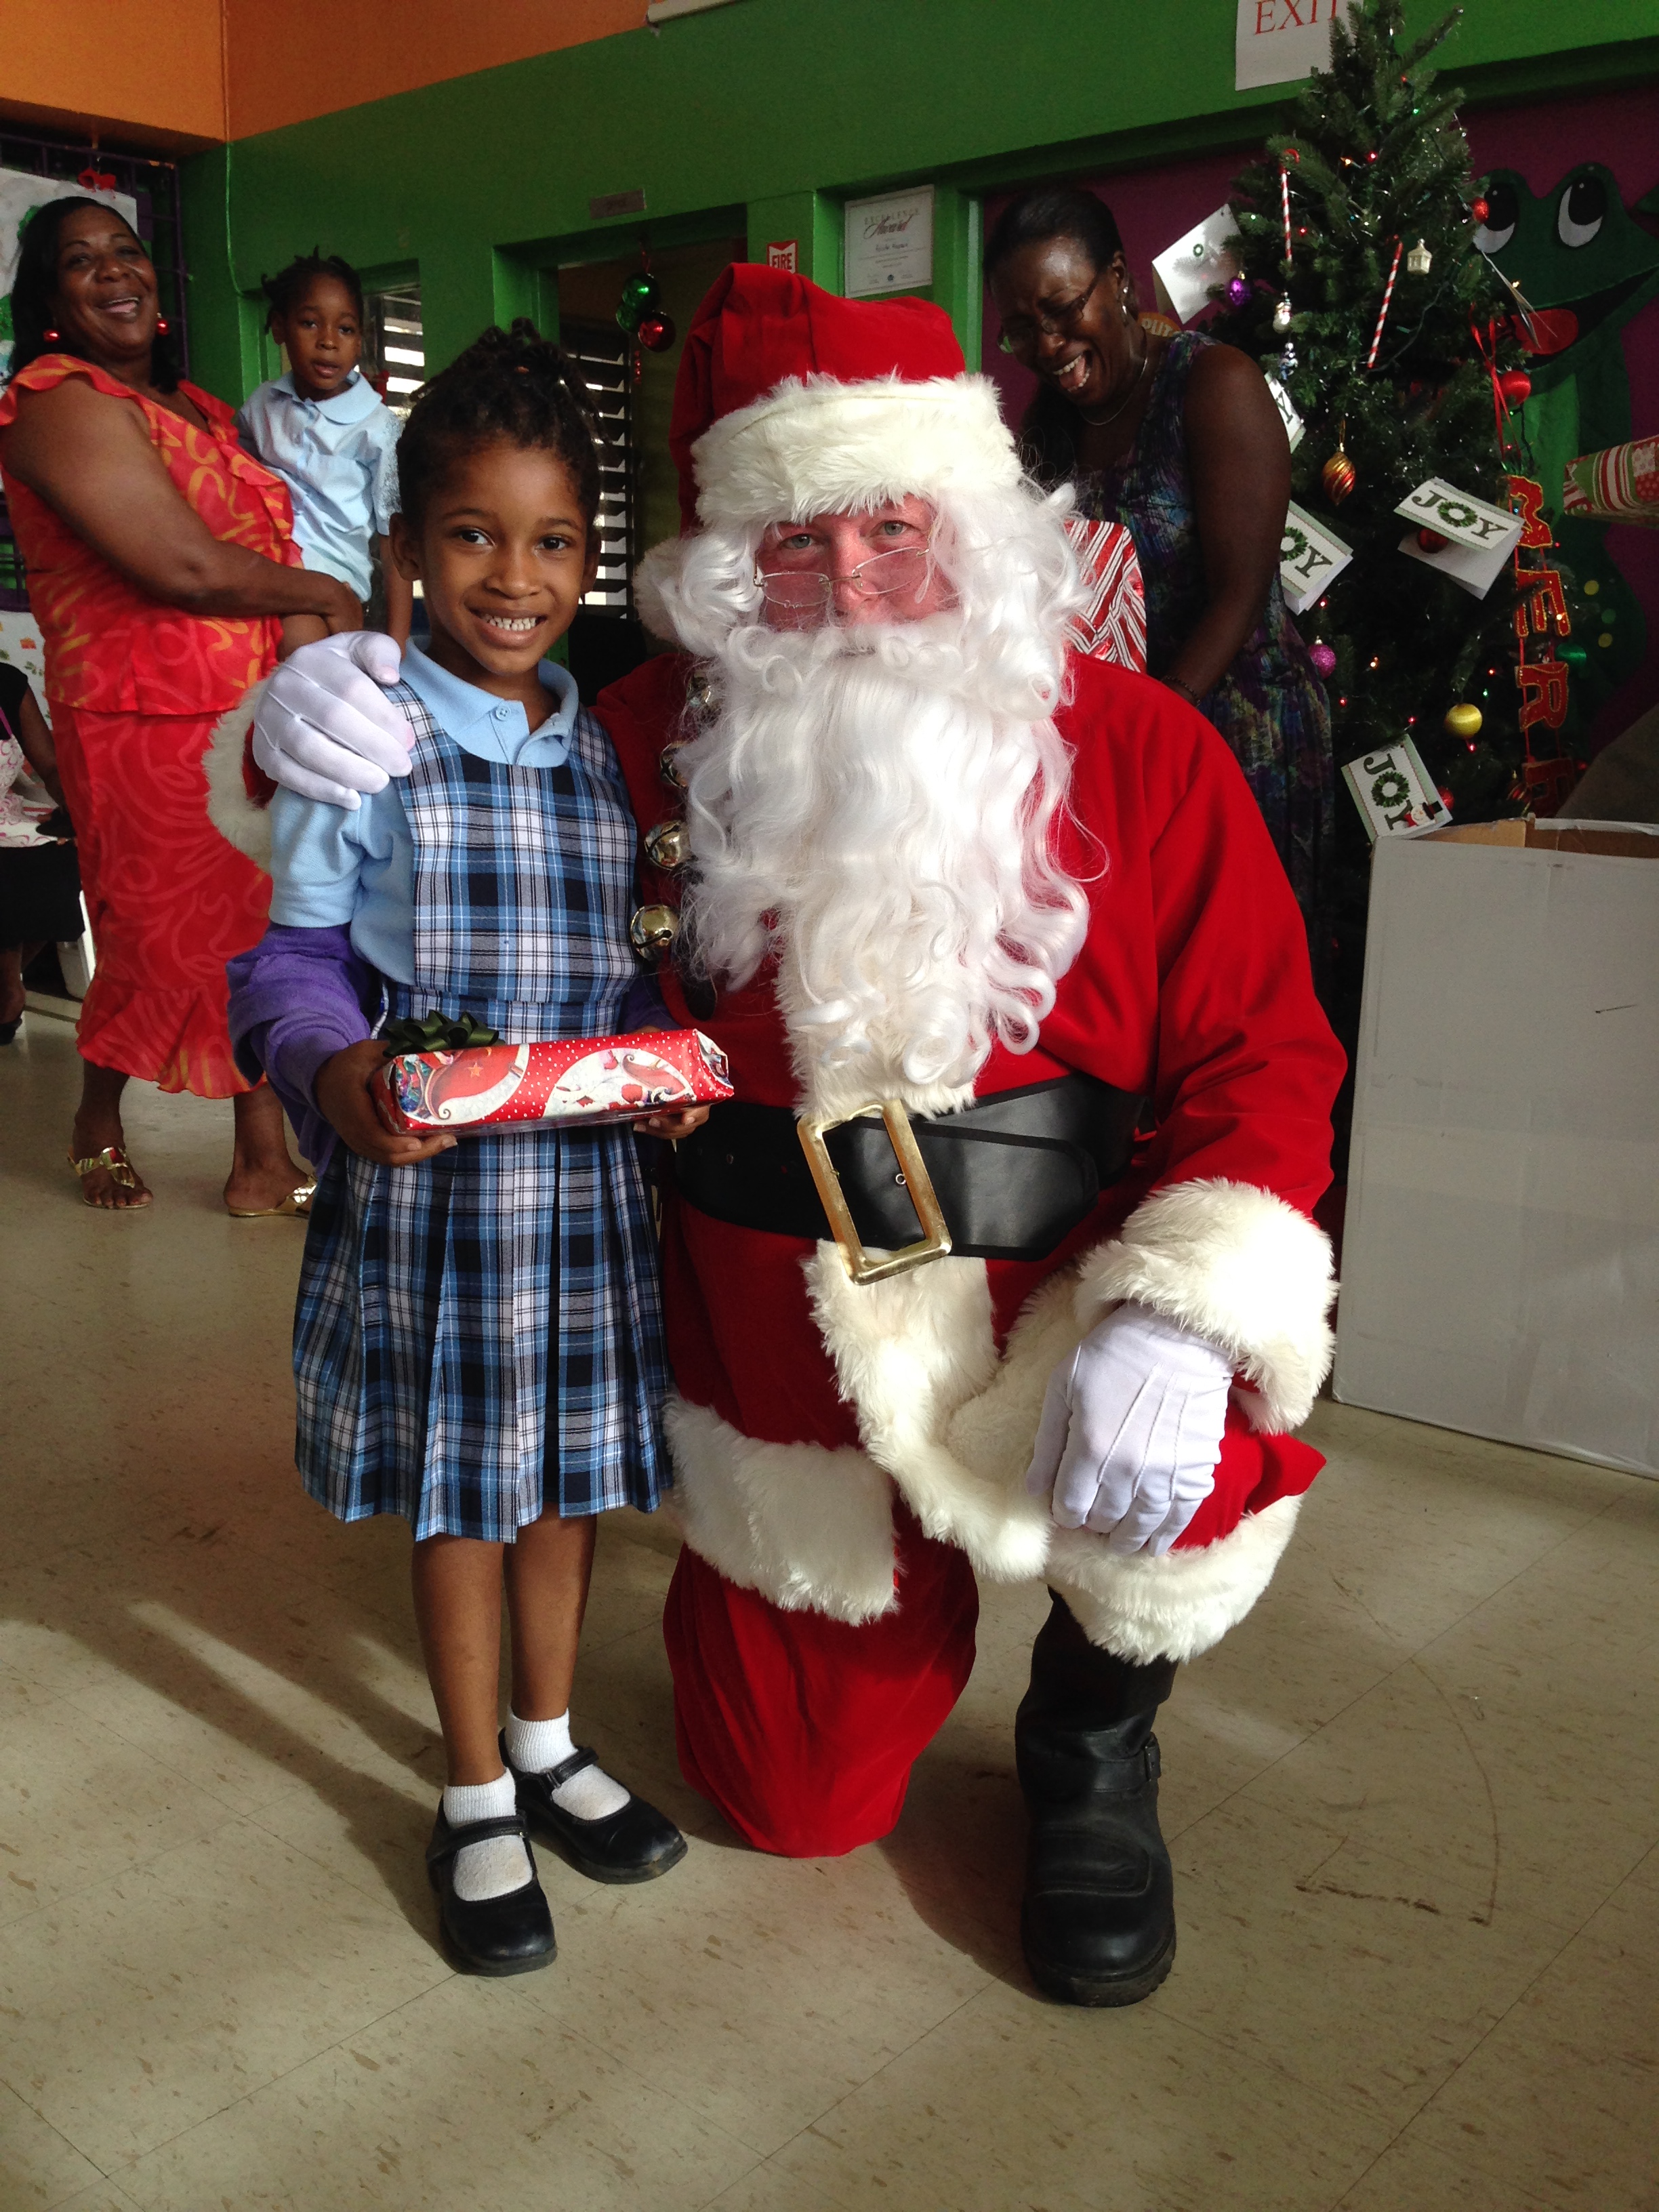 Rotary Club of St. Thomas Hosts Holiday Gift-Giving for Boys & Girls Club